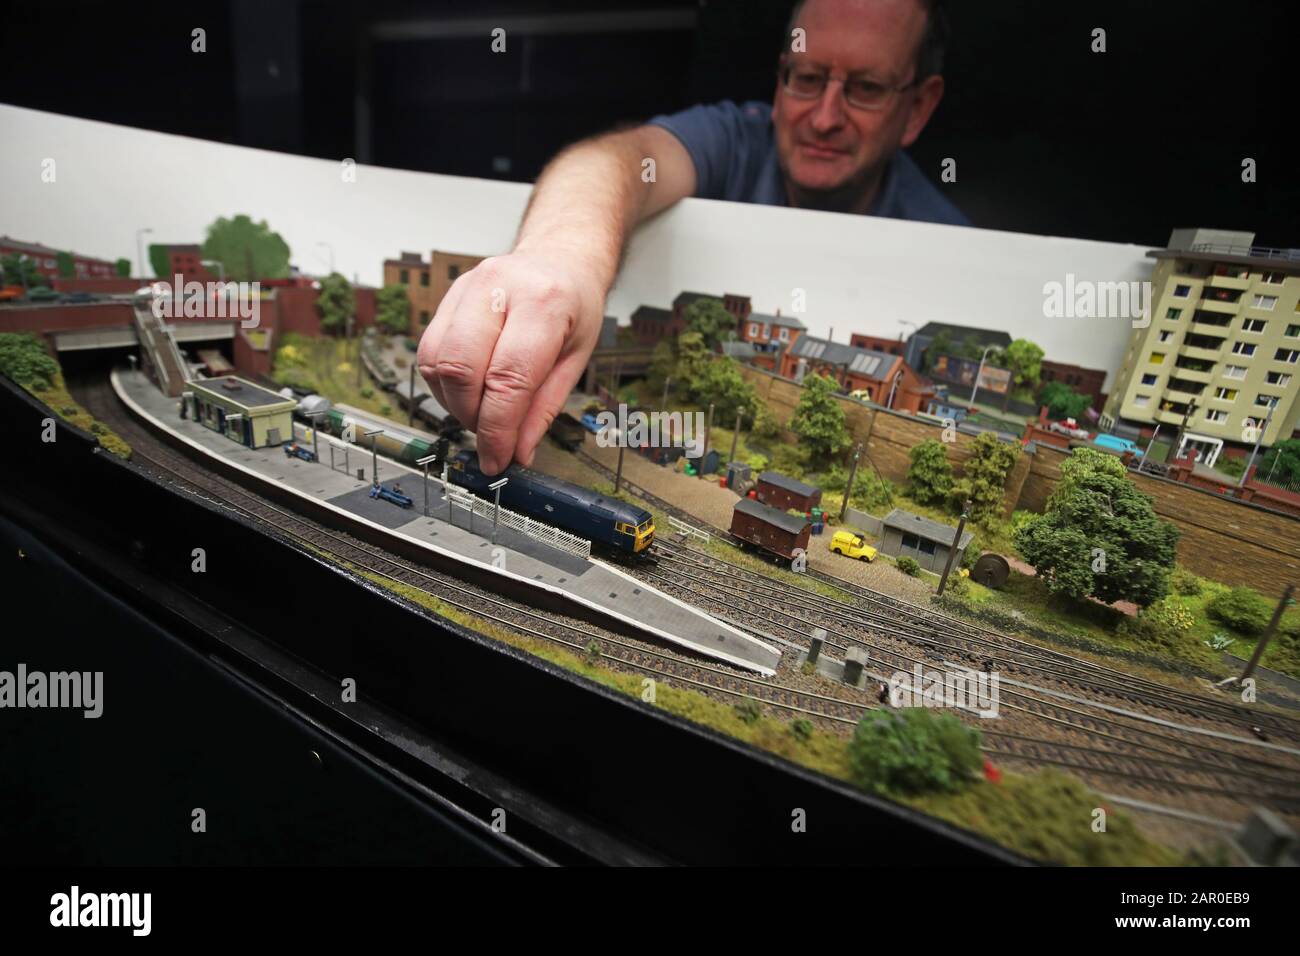 Stephen Farmer with his model representation of a Staffordshire railway at the 51st annual Pontefract Model Railway Exhibition in Pontefract, West Yorkshire. Stock Photo